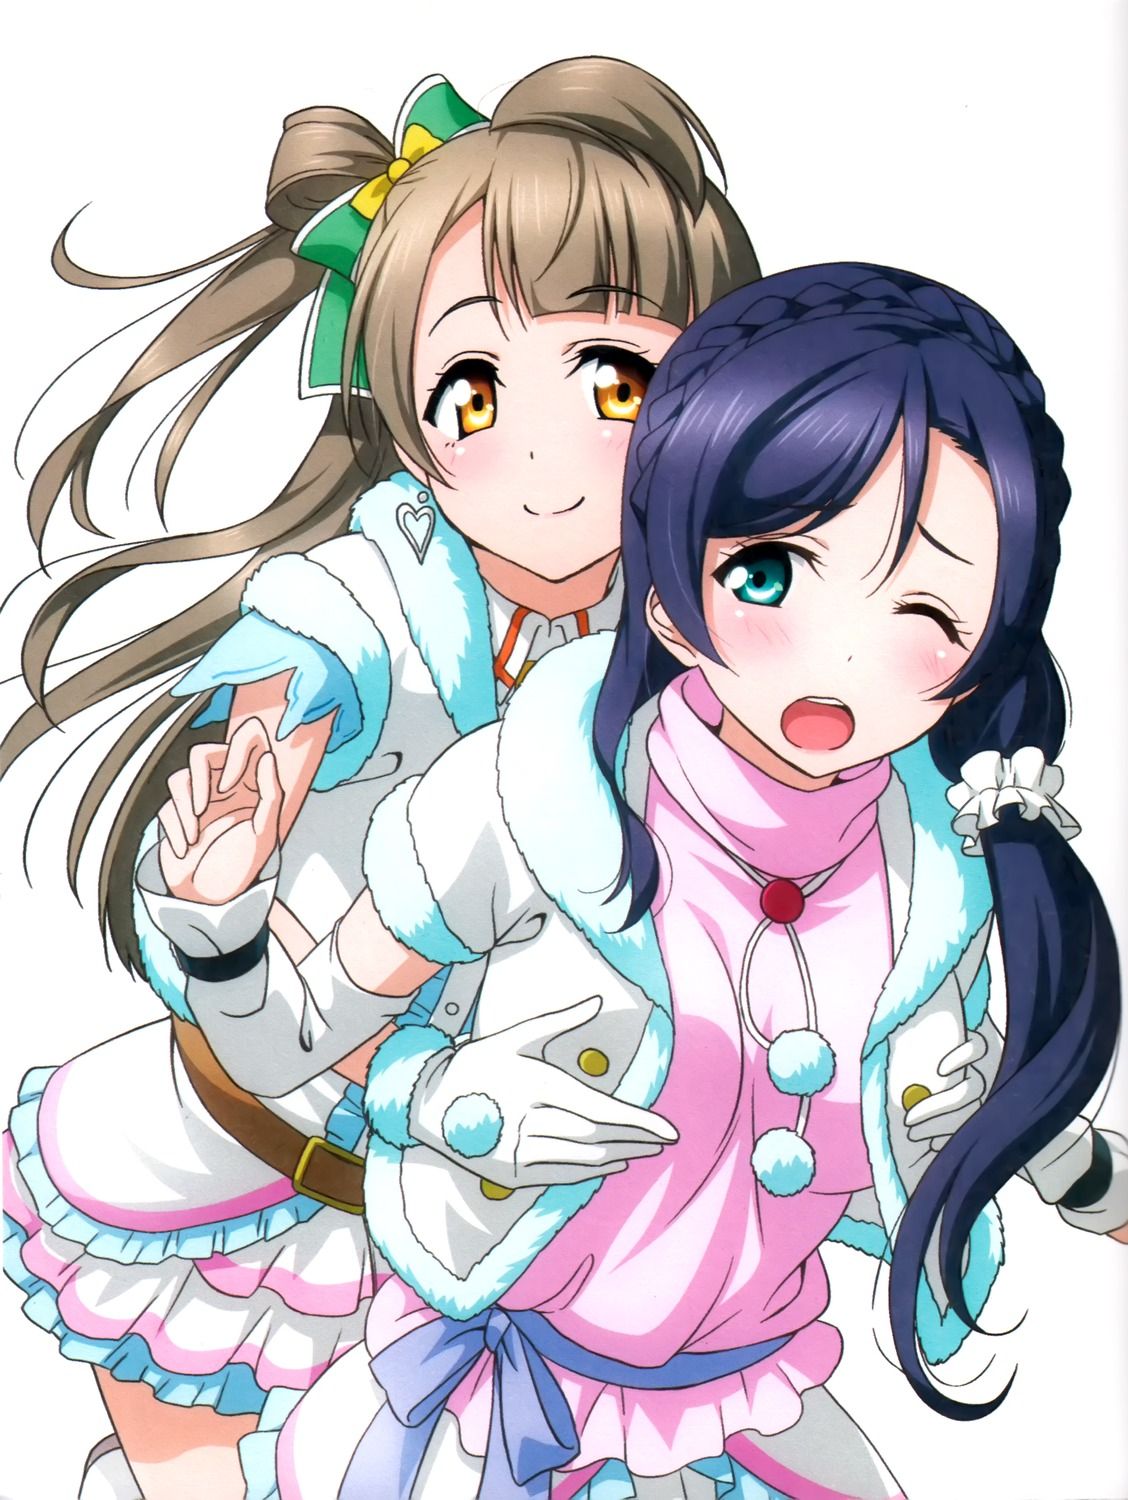 Love live! Wallpaper 05 [15 pictures] 6